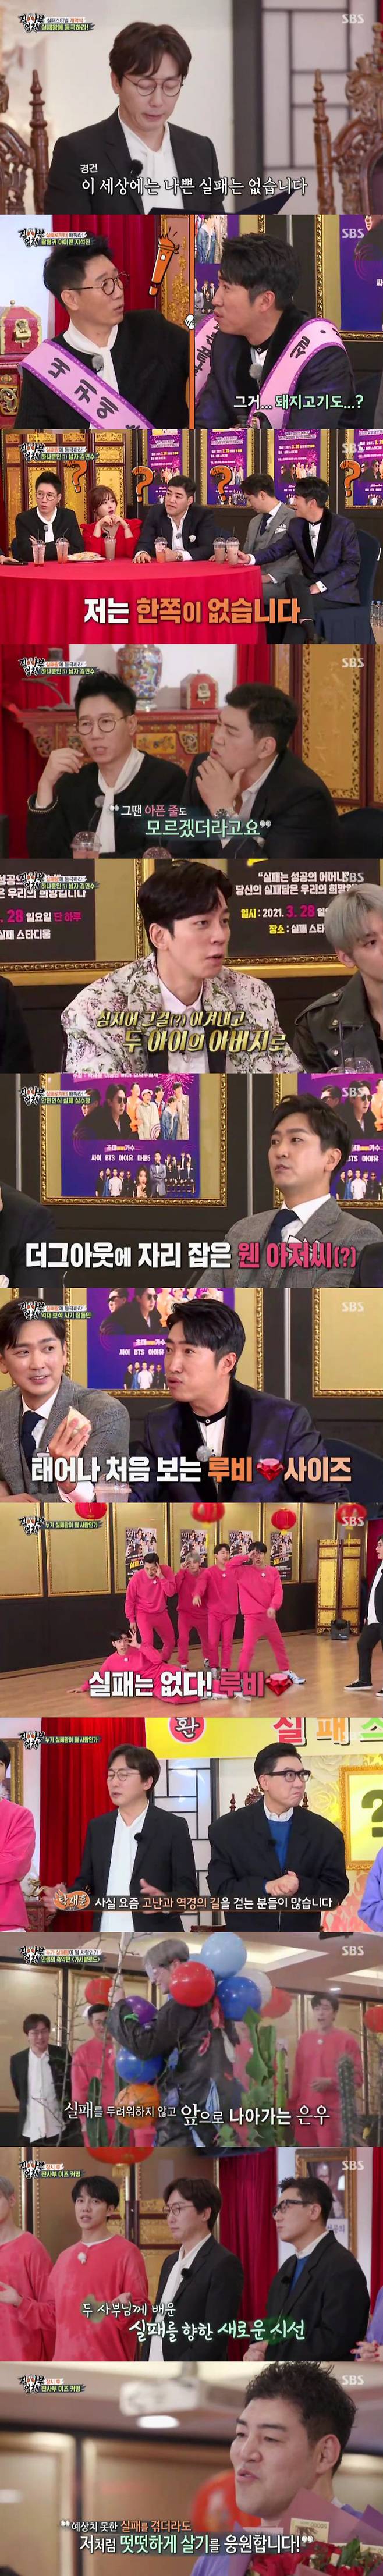 SBS All The Butlers entertainment The Godfather Lee Kyung-kyu won the best one minute by raising expectations just by appearing.According to Nielsen Korea, a TV viewer rating agency, SBS All The Butlers, which was broadcast on the 28th (Sunday), recorded 5.5% in the first part and 6.5% in the second part, while the topic and competitiveness index 2049 Target TV viewer ratings rose to 2.9% and the highest TV viewer ratings per minute rose to 8.2% ...On the day of the show, the long-awaited Failure Stival scene with Master Tak Jae-hun, Lee Sang-min, Failure Star Ji Suk-jin, Shim Soo-chang, Kim Min-soo, Jang Dong-min and Solbi was released.First, Tak Jae-hun said, There is no bad Failure in this world.Failure is part of the success, he said. The purpose of the Failure Festival is to come out of Failures experience and support Failure stars re-Top Model. Lee Sang-min said, I hope we will be a big cheer for the tired people.In addition, the King Failure, who gives strength to the tired Failure people, was given a subsidy of 1 million won to burn the Failure stars.Failure stars have been laughing at the extraordinary Failure story, such as the investment Failure and the billion-dollar jewel fraud that have been going through.In particular, Kim Min-soo shocked Failure stars by saying that he lost one testicle during the martial arts Kyonggi.Kim Min-soo said, I was hit by the opponents kick in the second round, but the plastic foul cup, which is a players protective tool, was broken.Then he was hit very strongly in the fourth round. I wanted something to be wrong.Nevertheless, Kim Min-soo said he took a three-minute break and continued Kyonggi.Kim Min-soo said, I did not even know it was sick at the time. The members admired that it is a pain that I can not even imagine, but it is great to play Kyonggi again.Even Kim Min-soo was cheered by everyone who said he won the Kyonggi that day.Kim Min-soo, who went to the hospital in an ambulance, applauded the story that he had undergone surgery to remove the blood from his legs, saying, I have survived and become a father of two children.Also on this day, All The Butlers Lee Seung-gi, Yang Se-hyeong, Shin Sung-rok, Jung Eun-woo, Kim Dong-hyun and Failure Star Ji Suk-jin, Shim Soo-chang, Kim Min-soo, Jang Dong-min and Solbi are Tak Jae-hun and Lee Sang Top Model on the extraordinary game - prepared by MinThere are many people who walk the path of hardship and adversity these days.I prepared for the life like Innocent Thing Field Road, the intention of walking the road together to the end. He introduced Innocent Thing Field Road Game.This is the victory of a team that blows more balloons as it passes through the Innocent Thing Field. Lee Sang-min added, It is only when we taste a lot of Failure, endure the trials and finally get out that success is in front of us.I will go without giving up on any Innocent Thing field in front of me, said Jung Eun-woo, who became the Top Model.Thanks to the support of the members, Jung Eun-woo passed through the Innocent Thing Field safely and left 11 balloons, but Kim Min-soo left 15 balloons and the Failure Star team won.Since then, the group Game In the Well has been conducted, and Kim Min-soo has won the final result of Failure King.Kim Min-soo said, I hope I will live like a man like me even if I have an unexpected failure.On the other hand, at the end of the broadcast, members gathered in the mountain of Inje, Gangwon Province were revealed.Is not it a natural master? In front of the members who wondered about the identity of the master, someone who said that he was a master of the master appeared.As he was leading the members to the place where Master is, he explained to Master, Master had a rich movie and honor that was unrivaled when he was in the city, but he entered the school a month ago, saying, I will leave the world before the world abandons me.At the end of the mountain trail along the school, I saw the back of the Master, who was in the valley with a questionable purple dress.The members said, Are you old? And Are you doing that all day? Yang Se-hyeong said, It is only a month old, but it is a geek.The identity of the Master was the entertainment The Godfather Lee Kyung-kyu.Lee Kyung-kyu said, I invited him to this deep mountain to tell me how to live for 10 years in the entertainment industry. He laughed, saying, I eat it day by day for the next 10 years.The scene in which Lee Kyung-kyu appeared in front of the members in the same way as Doin on the day raised expectations and won the best one minute with 8.2% of TV viewer ratings per minute.SBS All The Butlers is broadcast every Sunday at 6:25 pm.